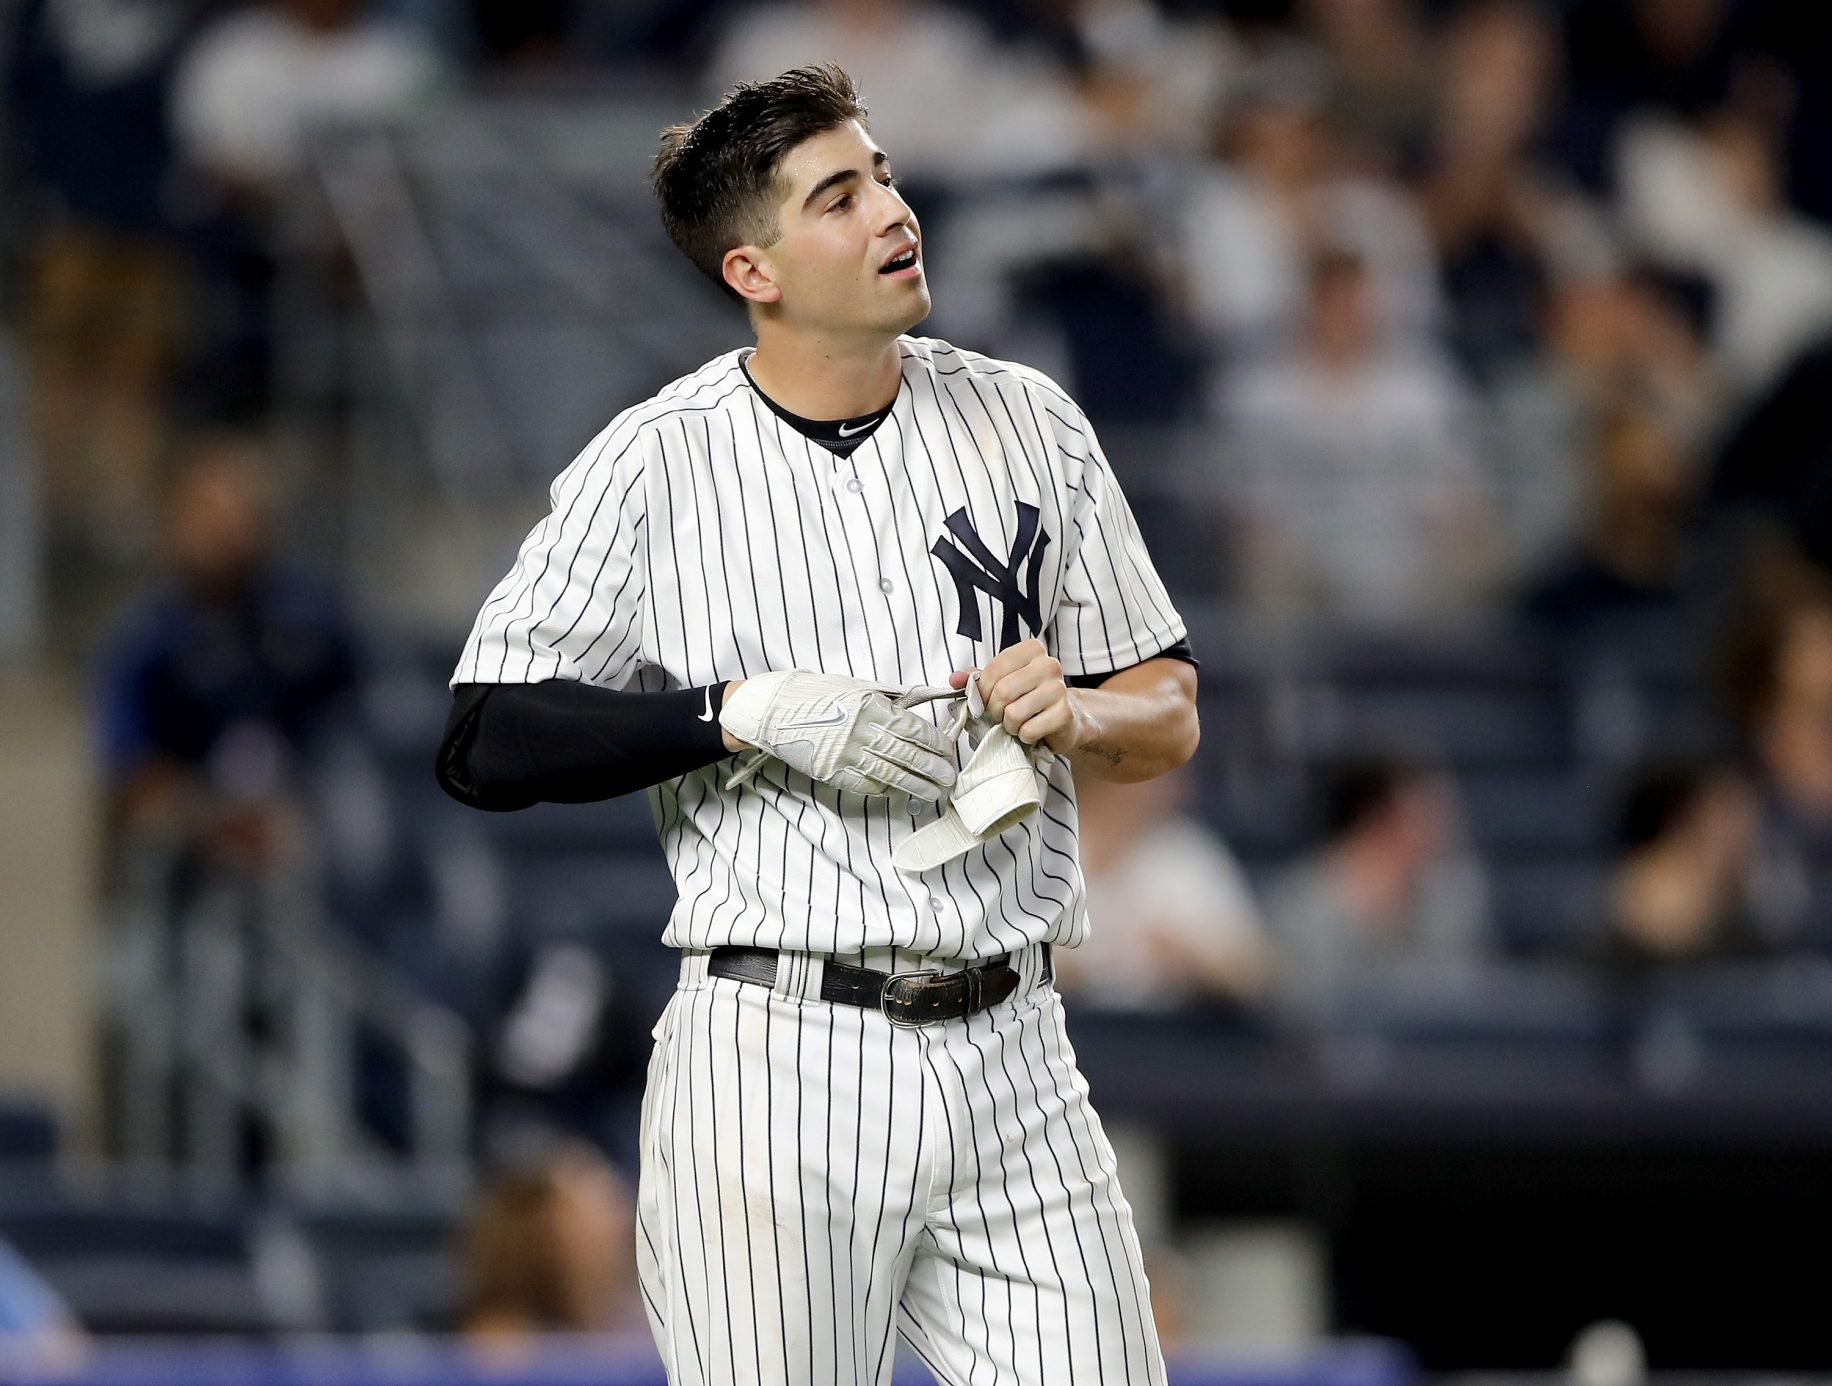 Tyler Wade is outshined again, Bronx Pinstripes